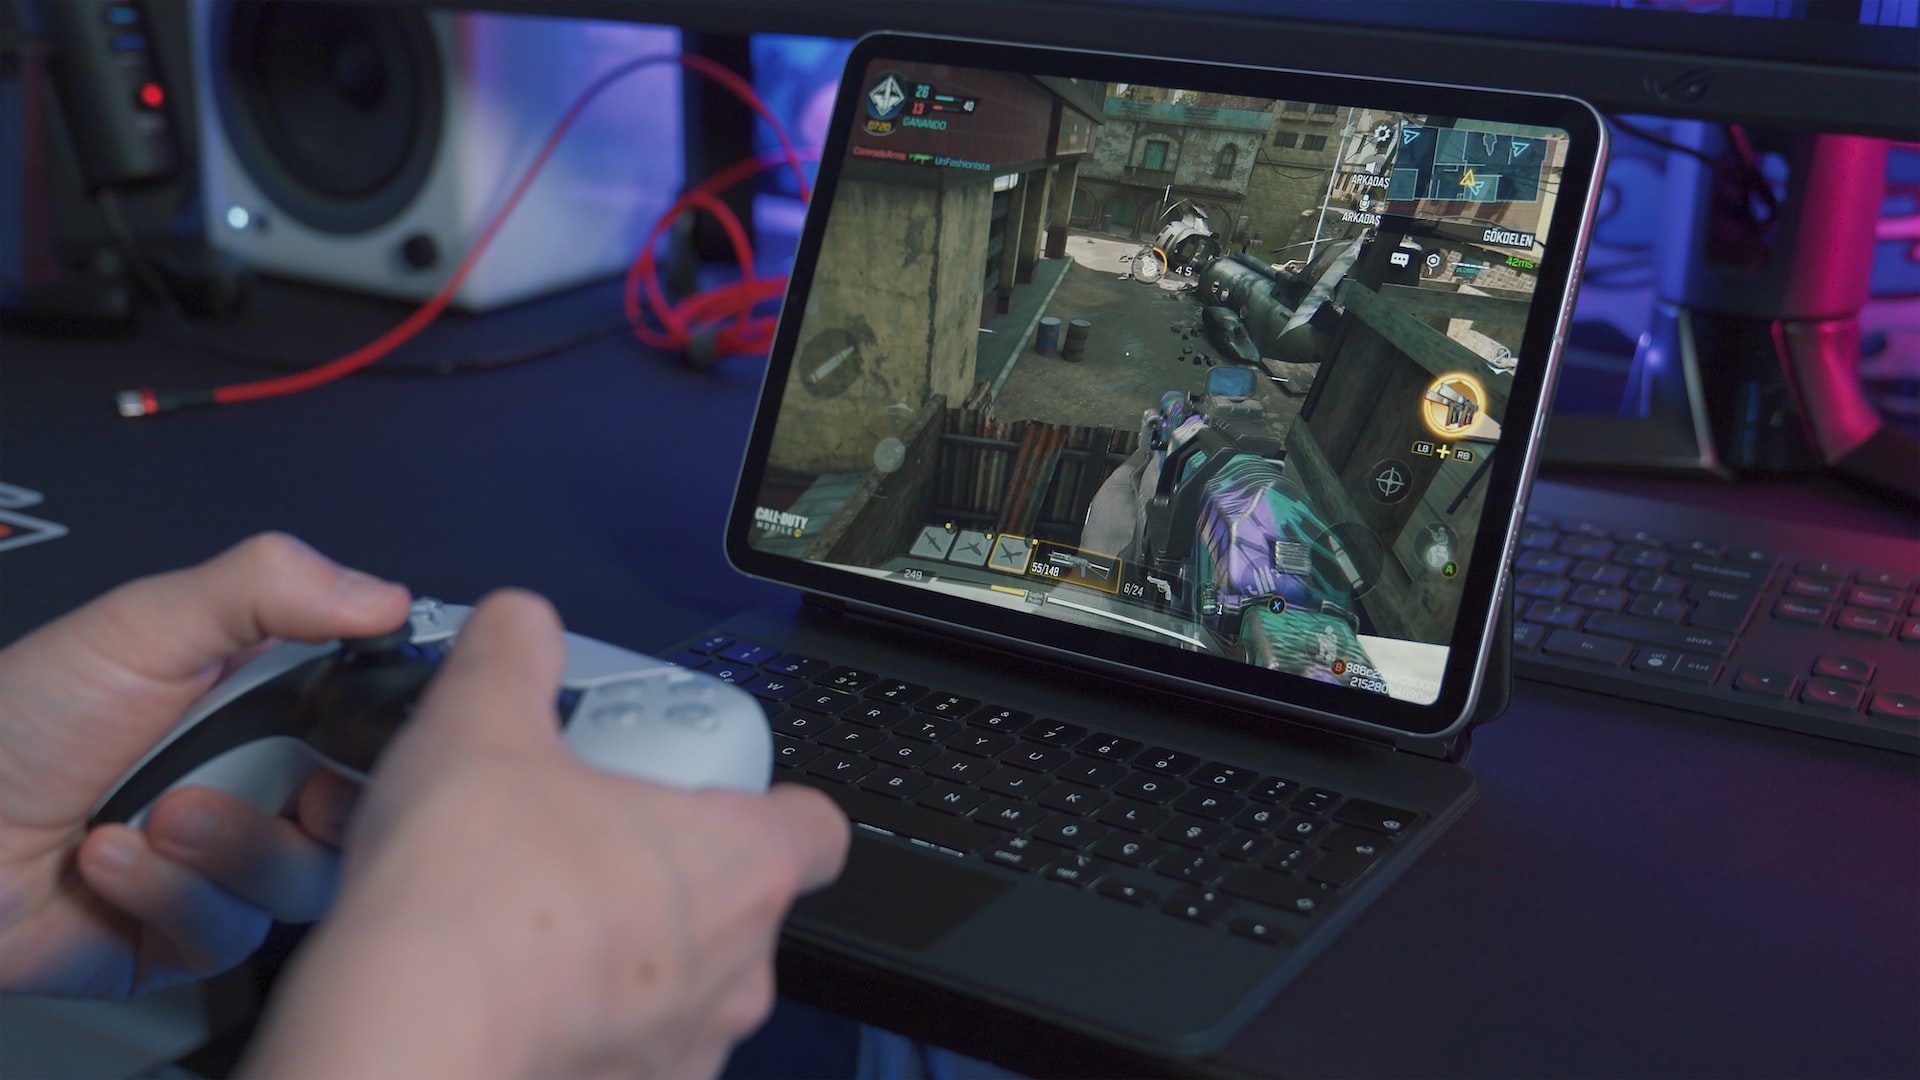 Portable and slim gaming laptops